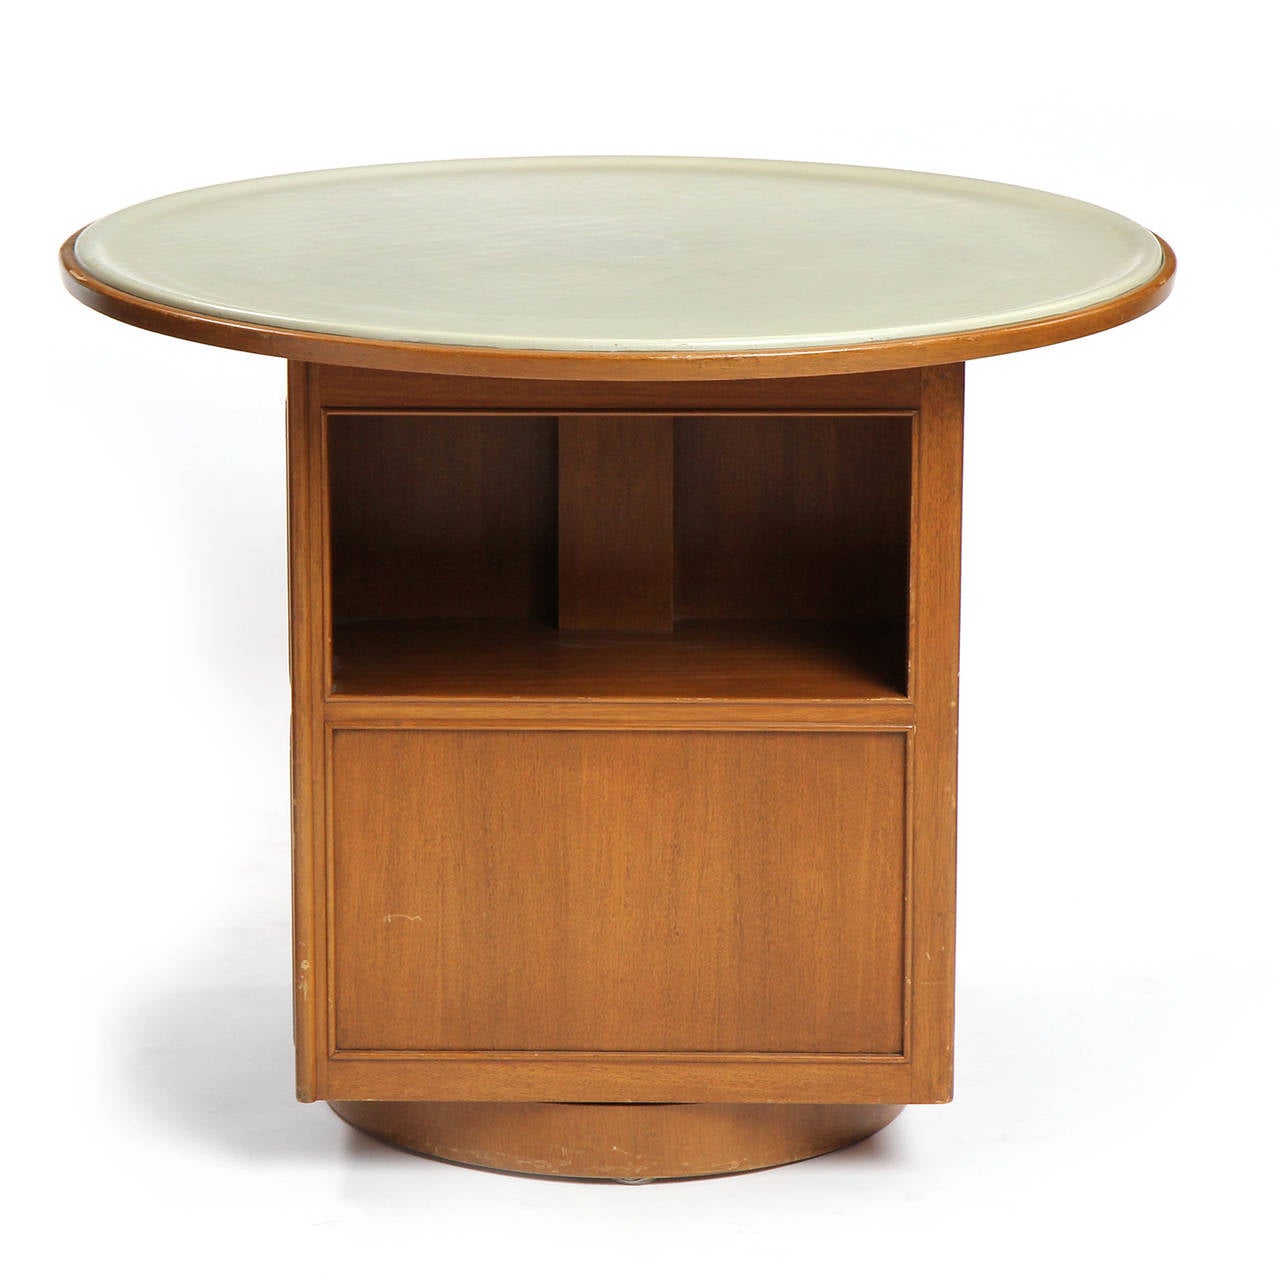 Mid-20th Century Four Sided Leather Top Table by Edward Wormley